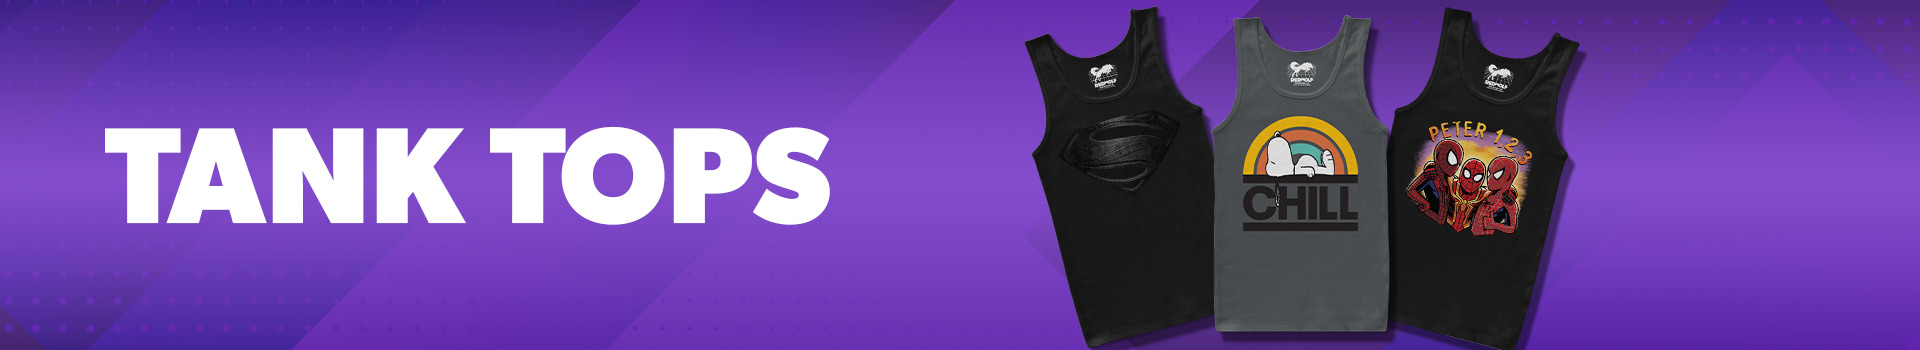 Category Banner - Sleeveless T-shirts & Tank Tops